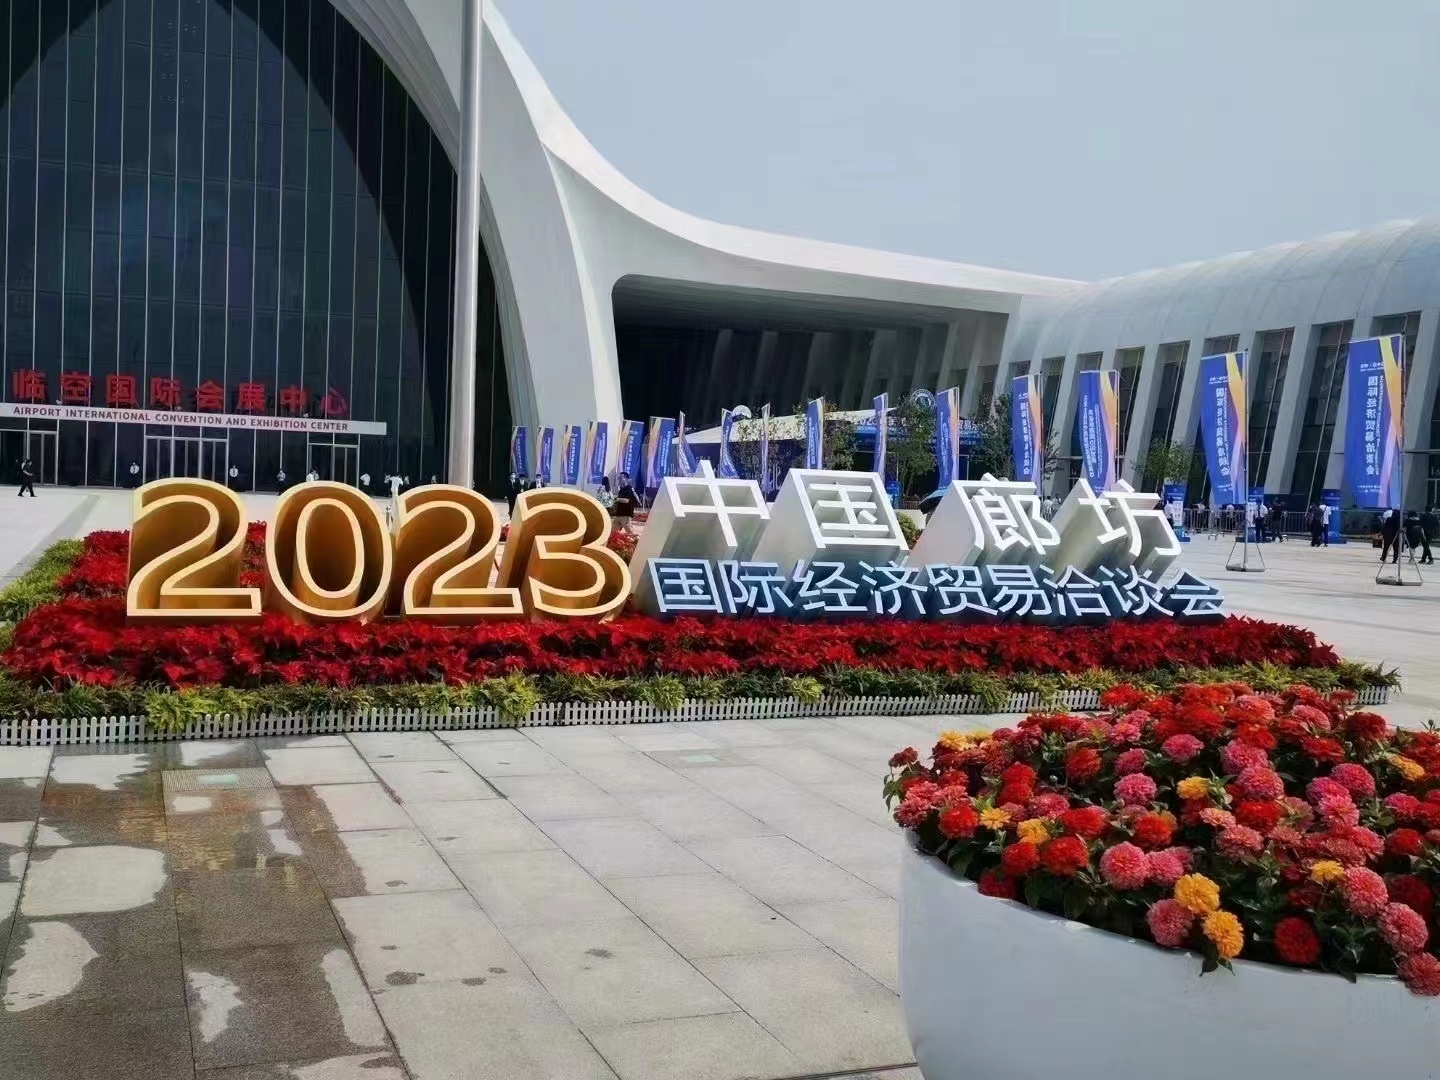 EES participation in the 2023 Langfang International Economic and Trade Fair has come to a successful conclusion!